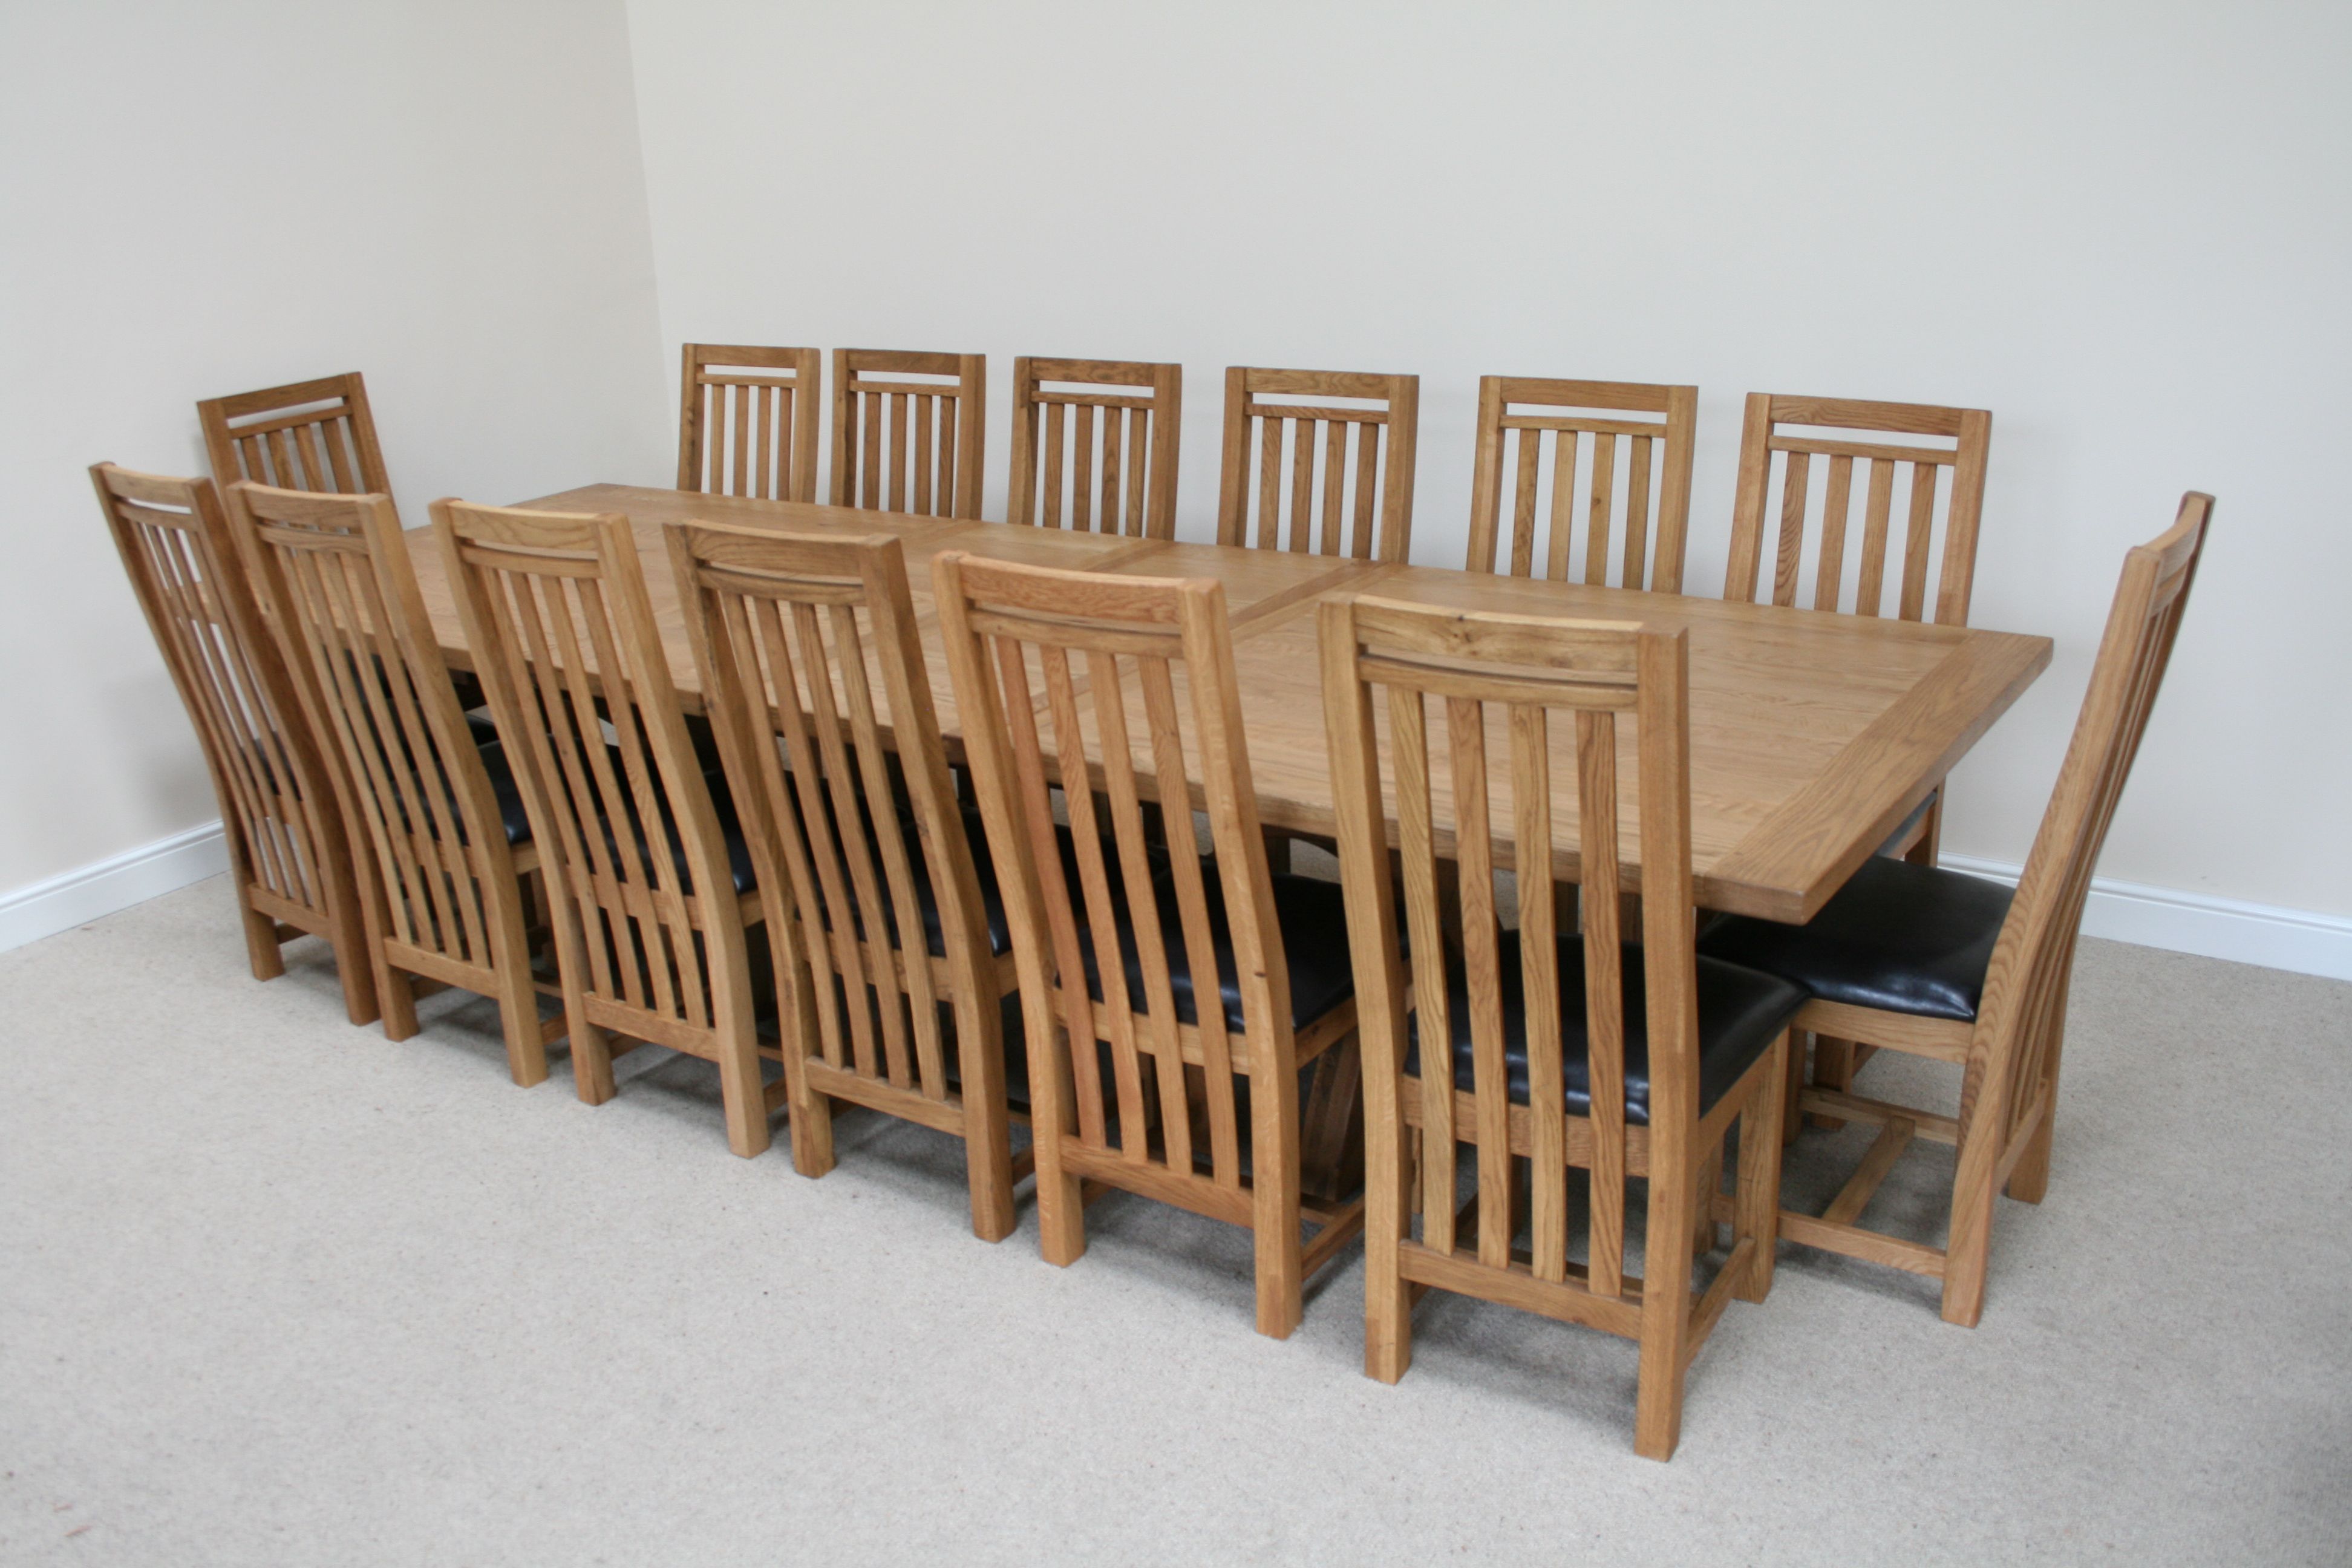 1.4m 8 Seater Square Oak Table now replaced by a 130cm square 8 seater